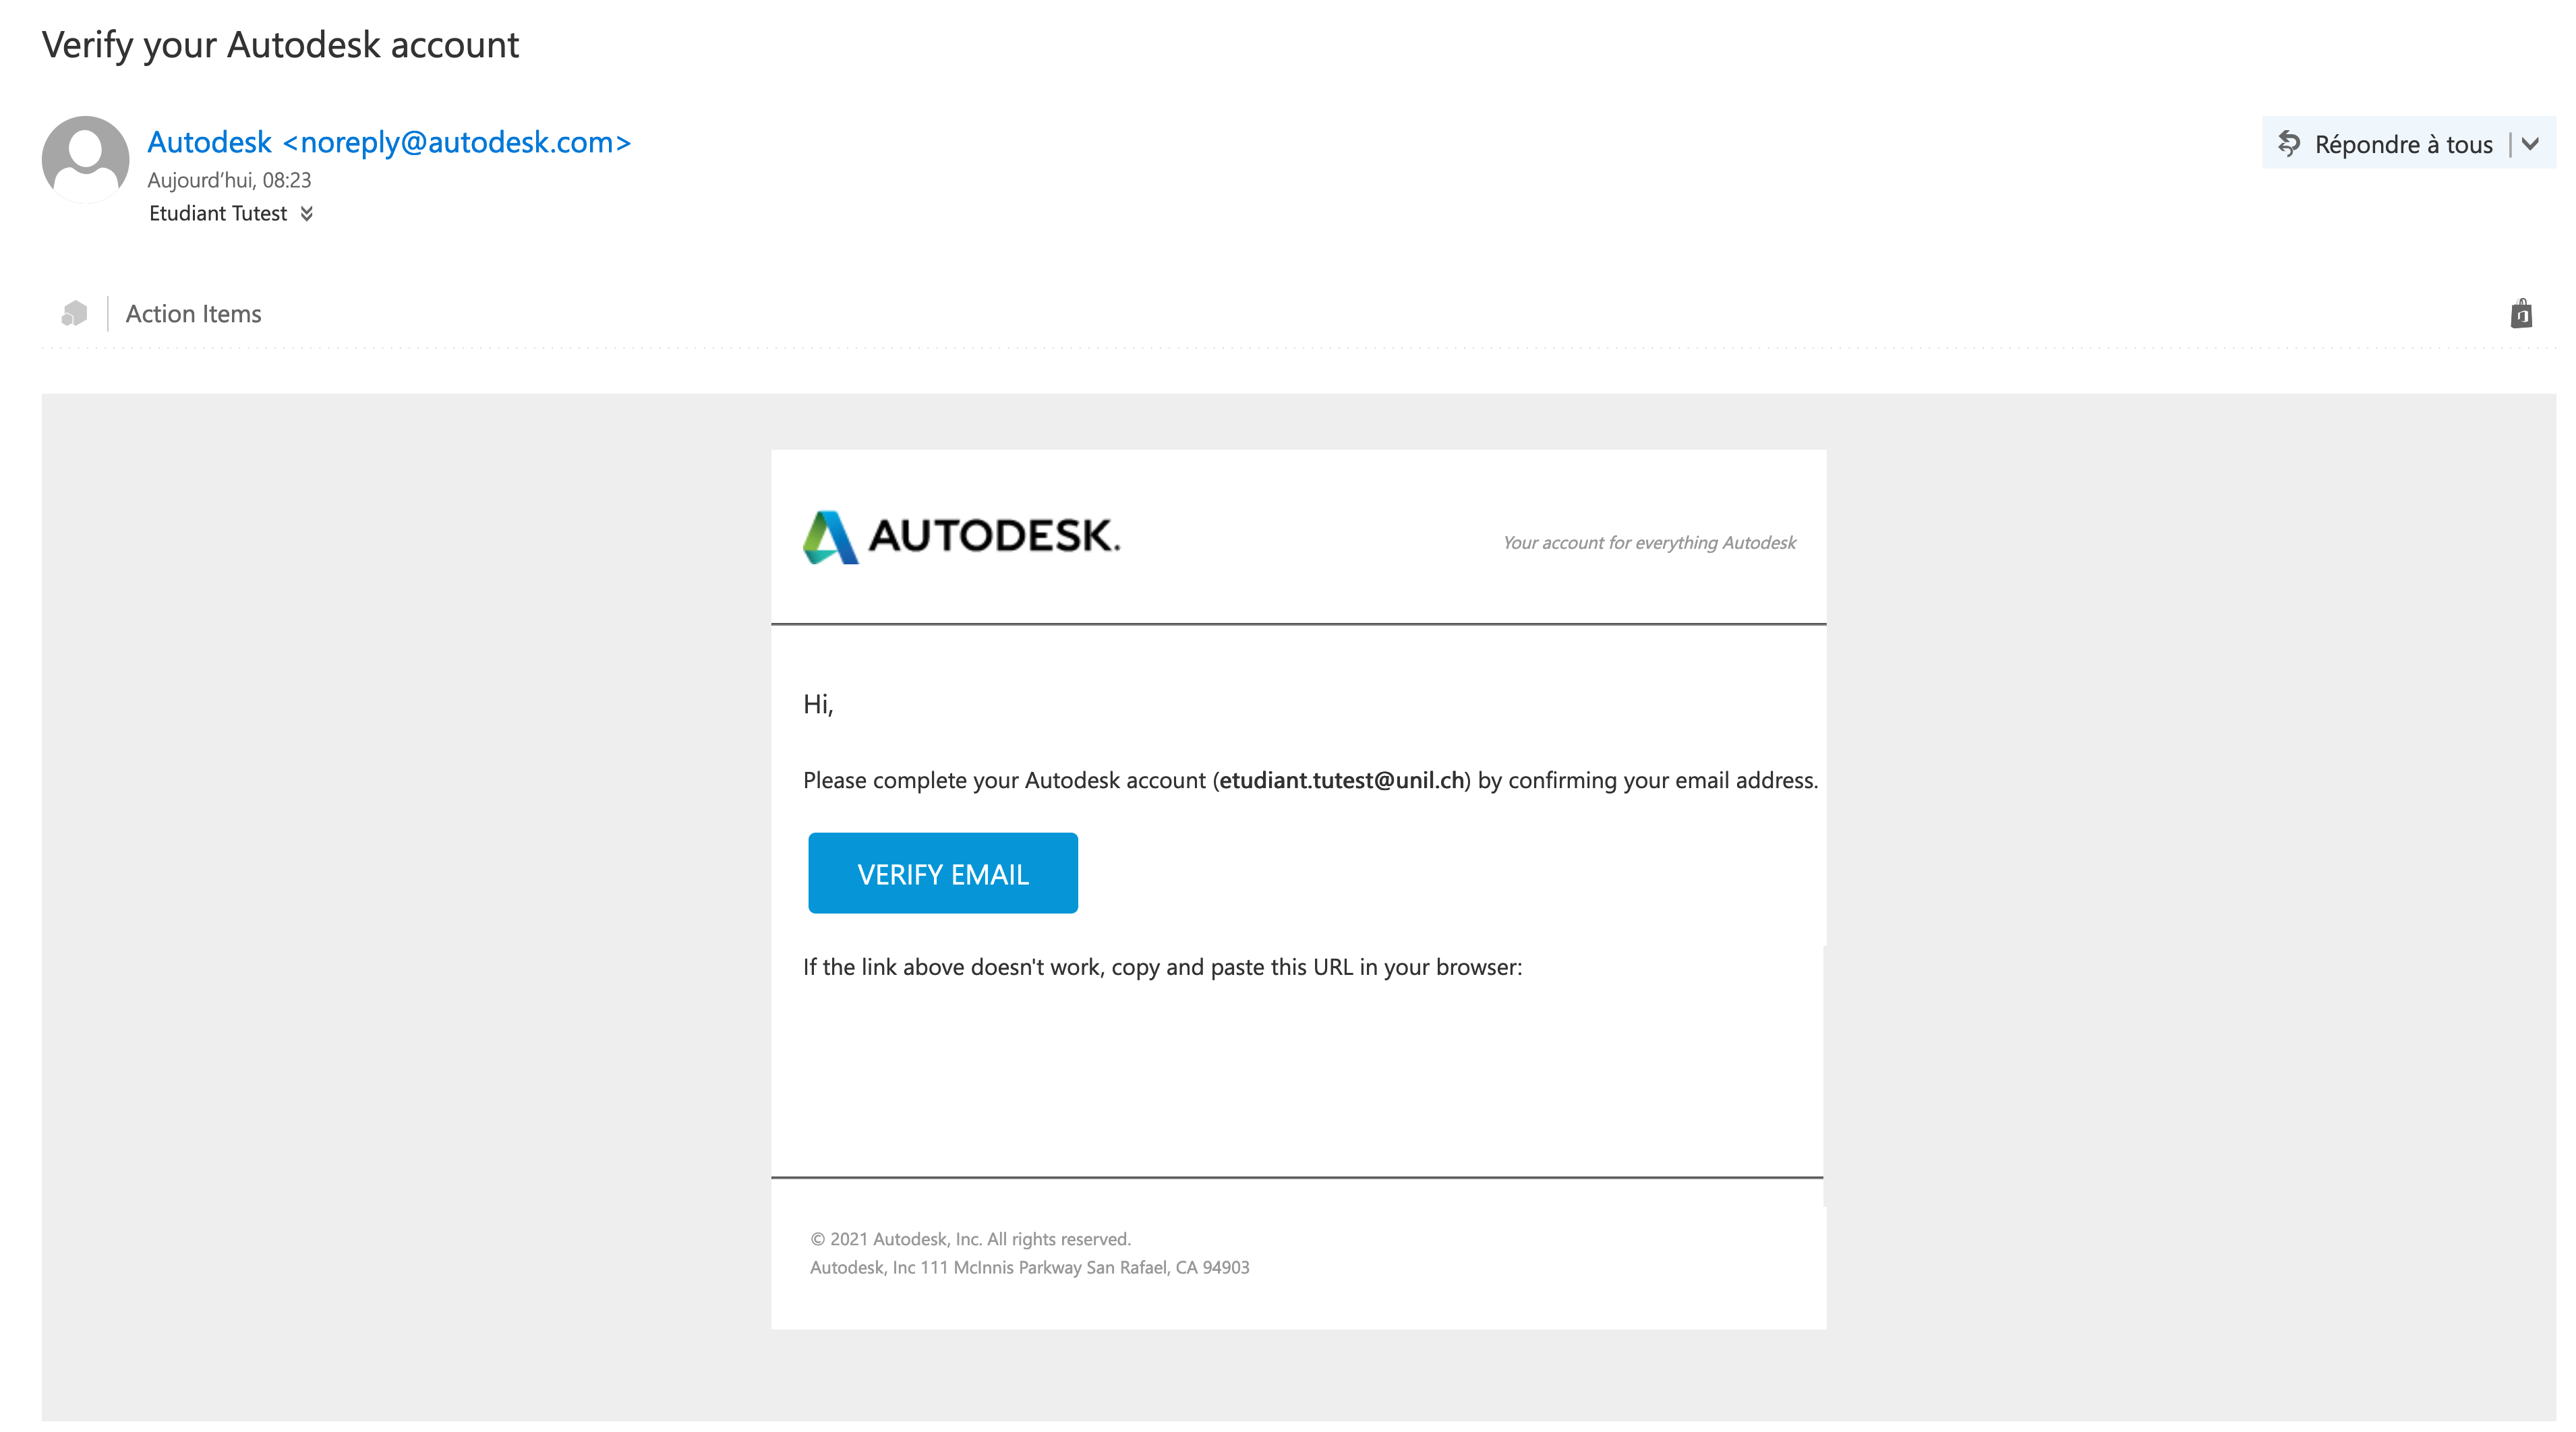 autodesk_00005.png